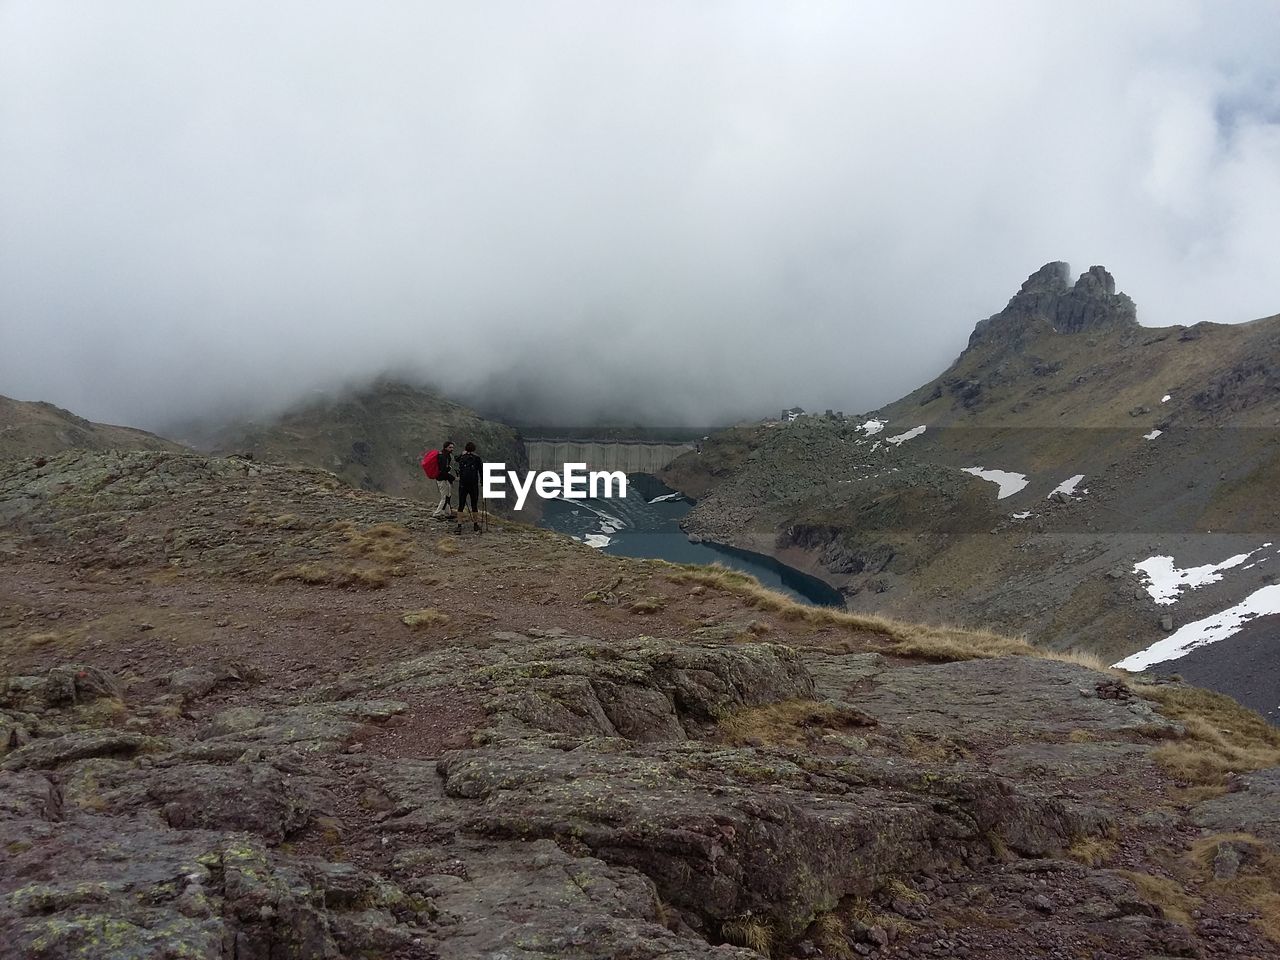 Hikers standing on rocky mountains by dam during foggy weather